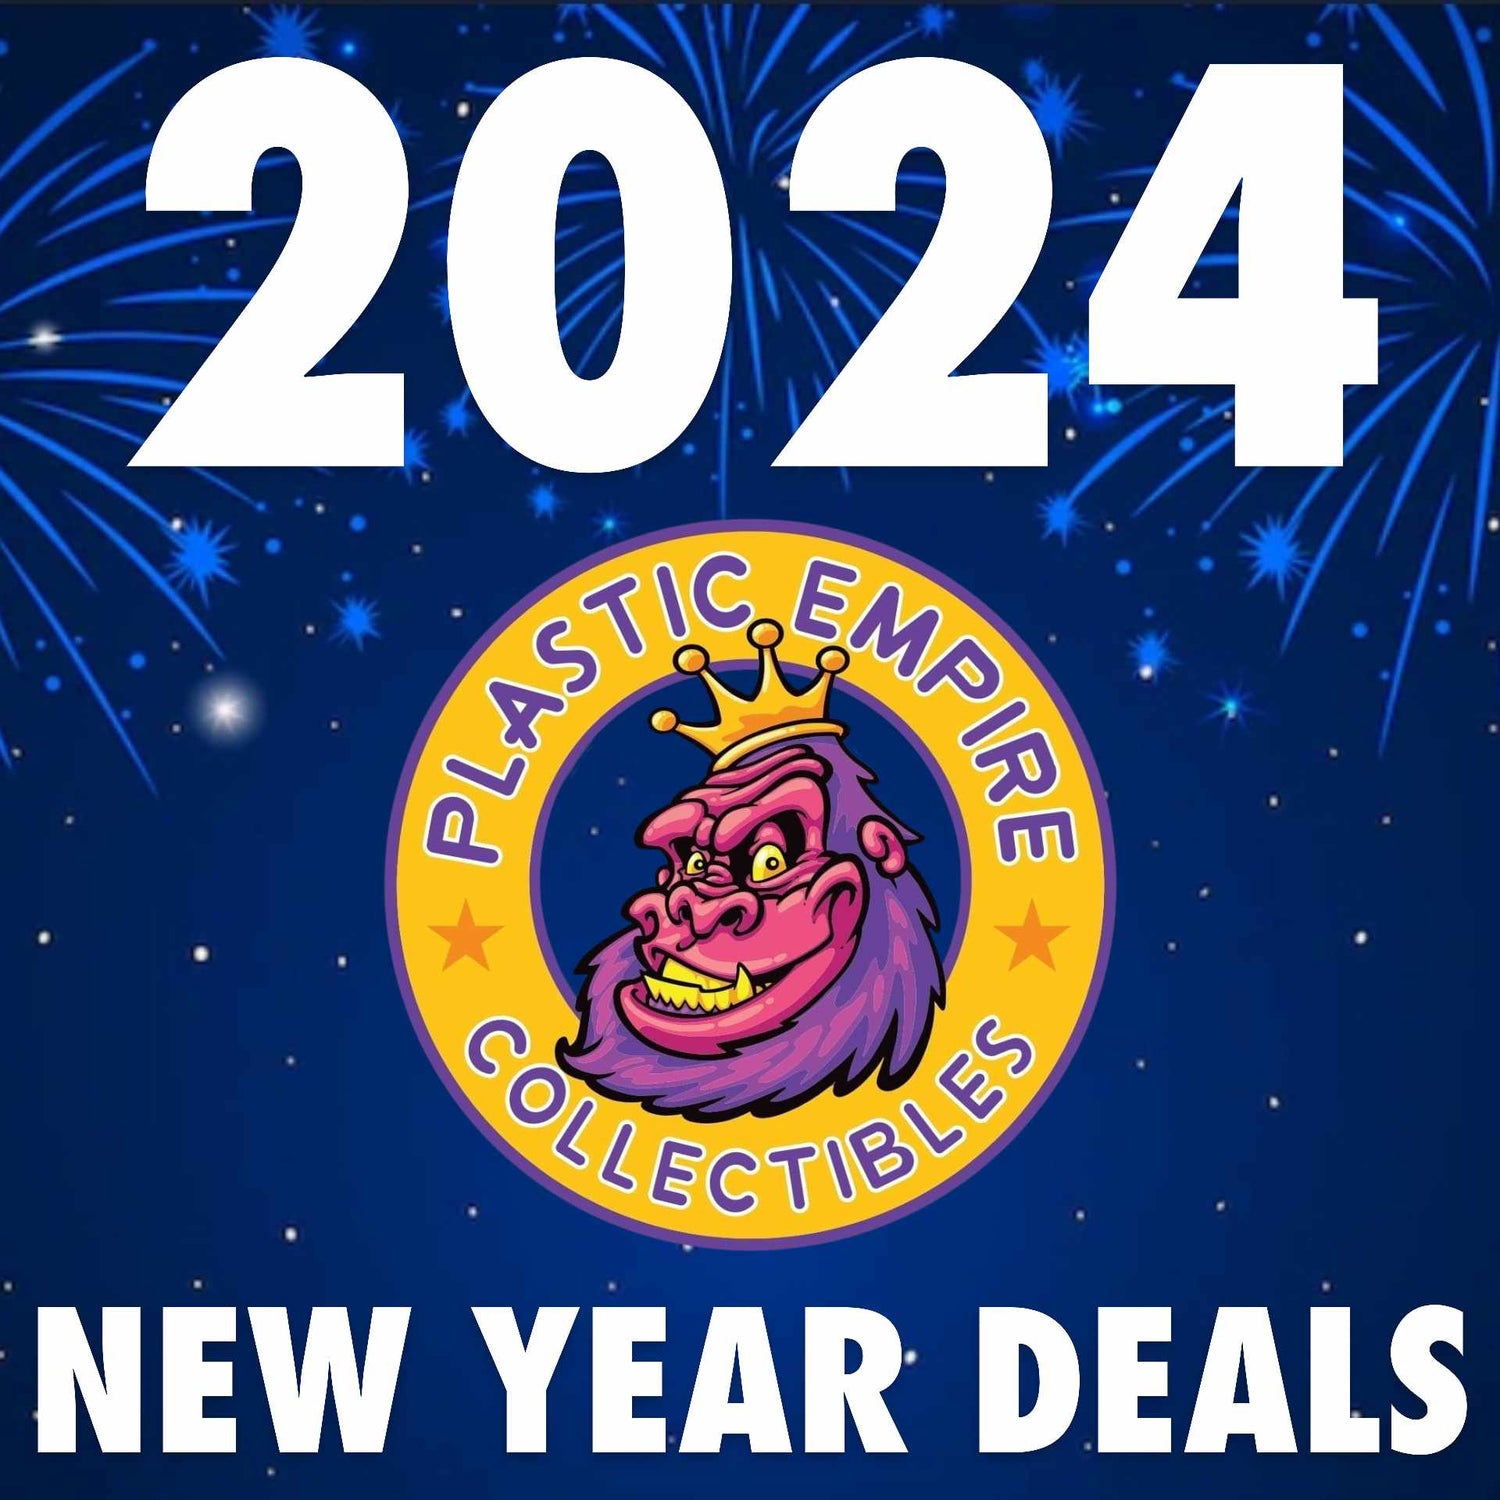 NEW YEAR DEALS